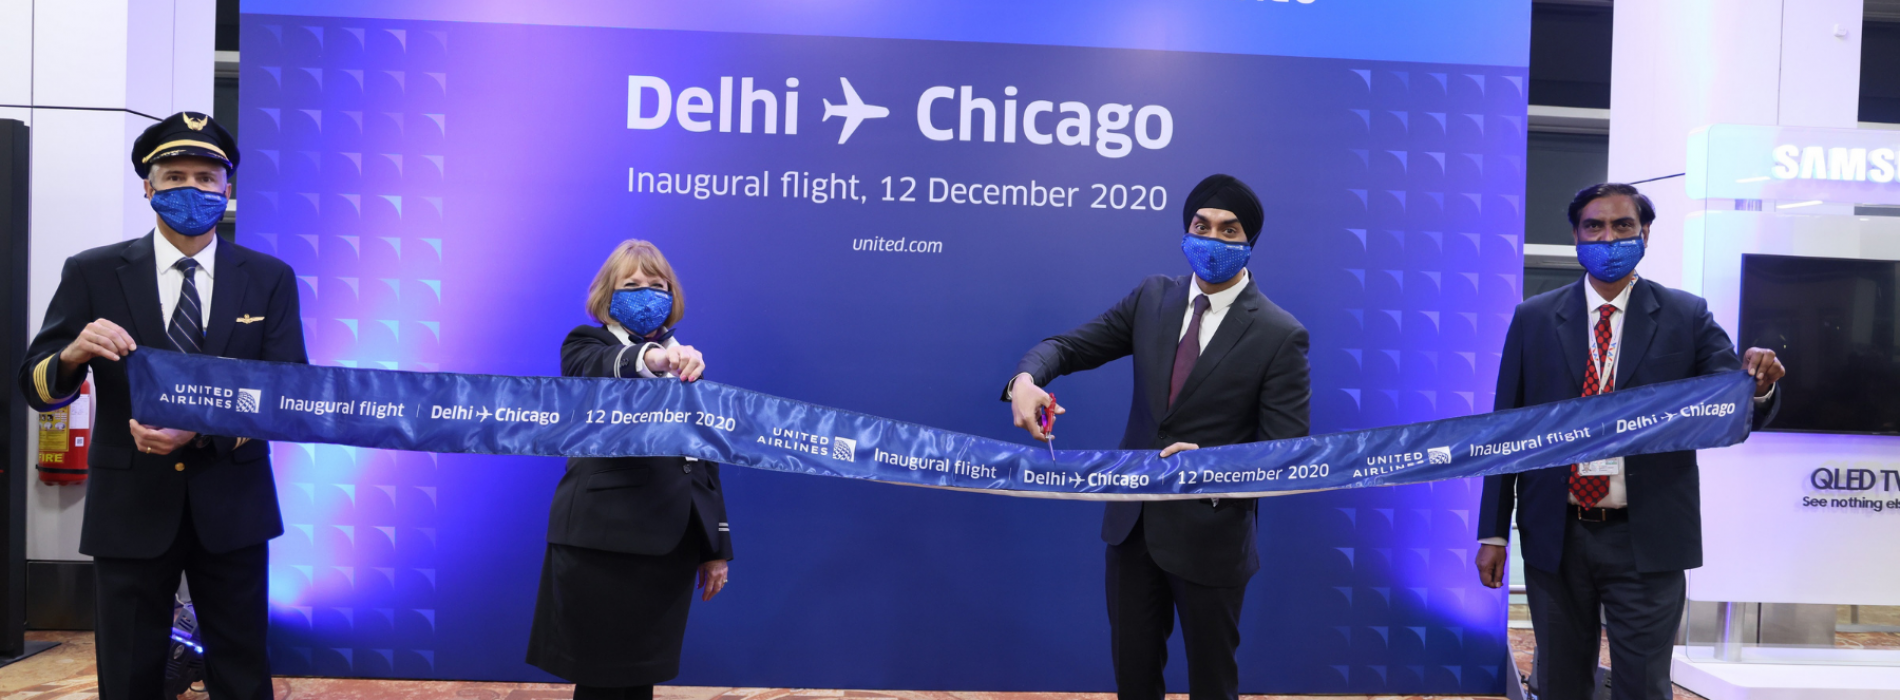 United Airlines Inaugurates Nonstop Service Between New Delhi and Chicago